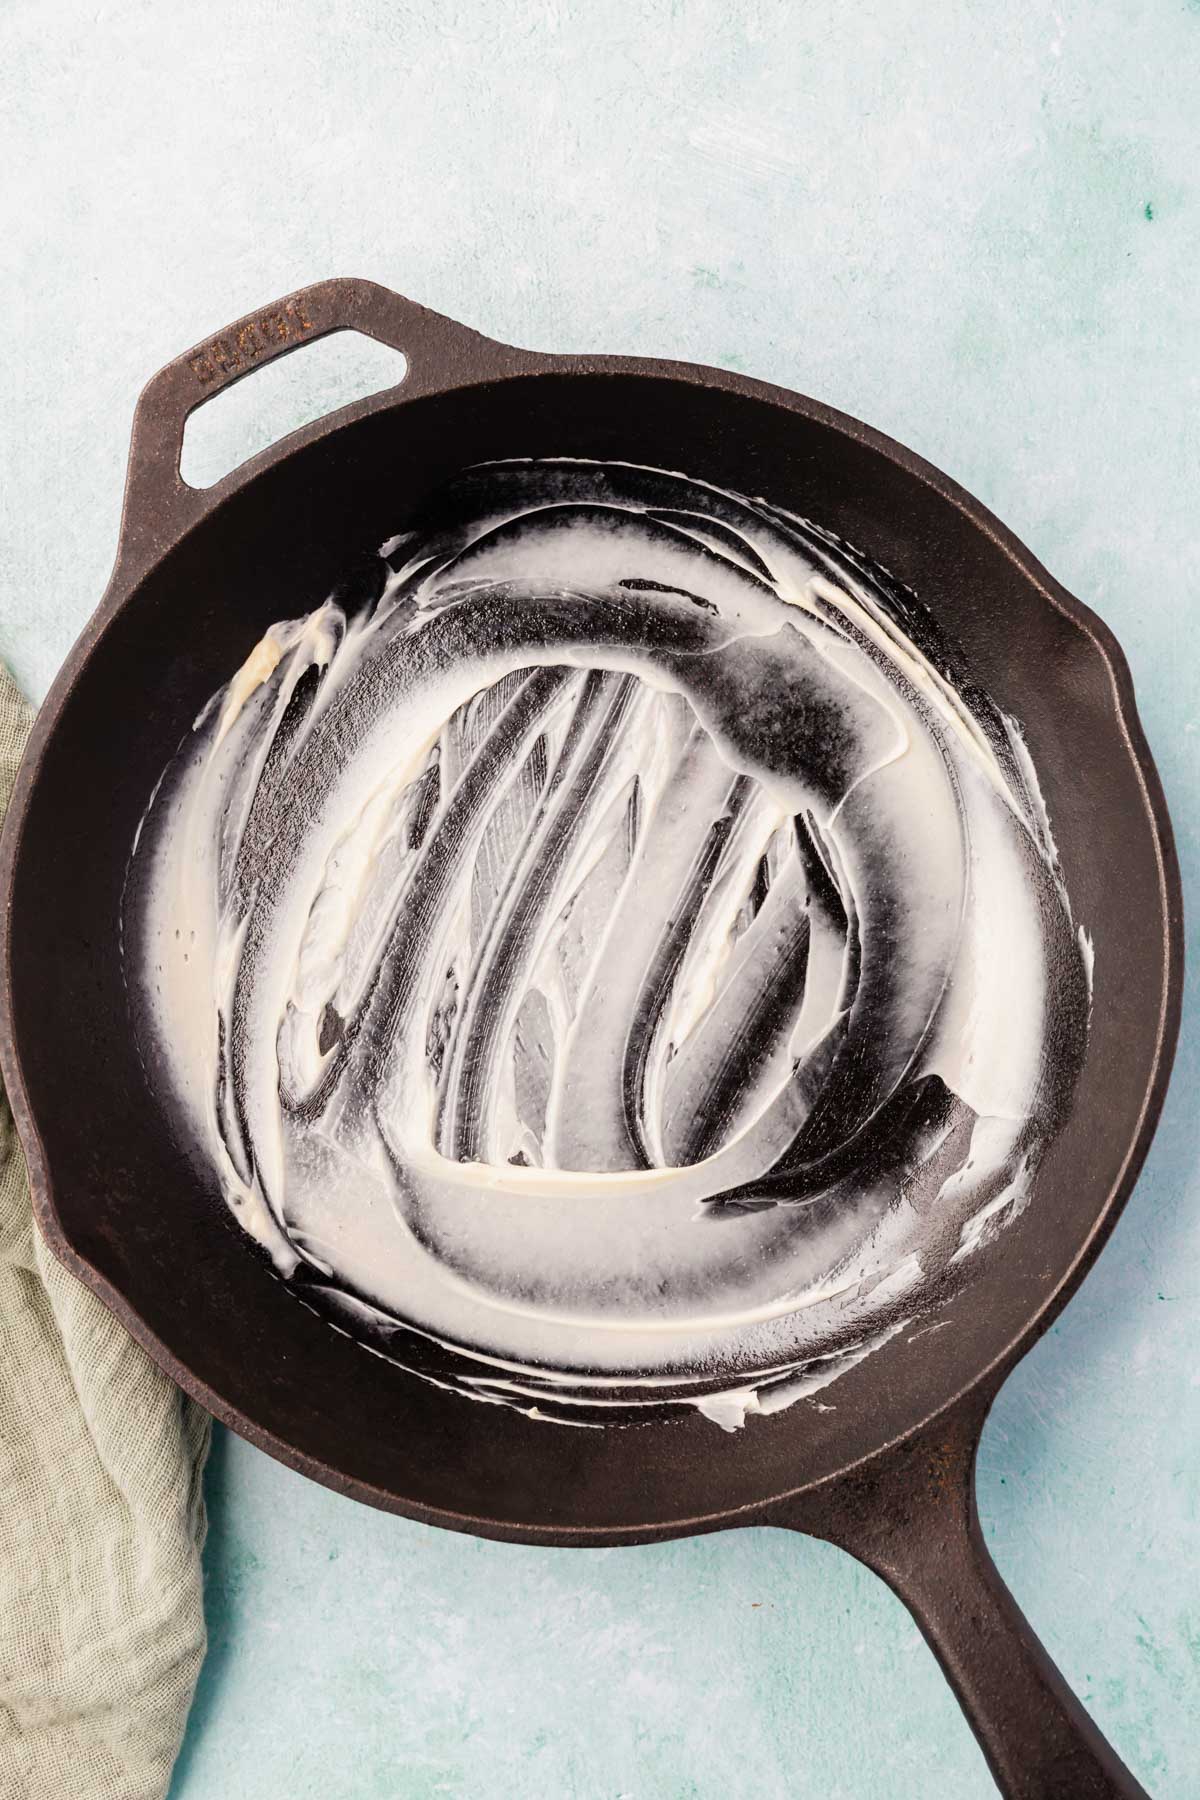 Butter smeared over a cast iron skillet.